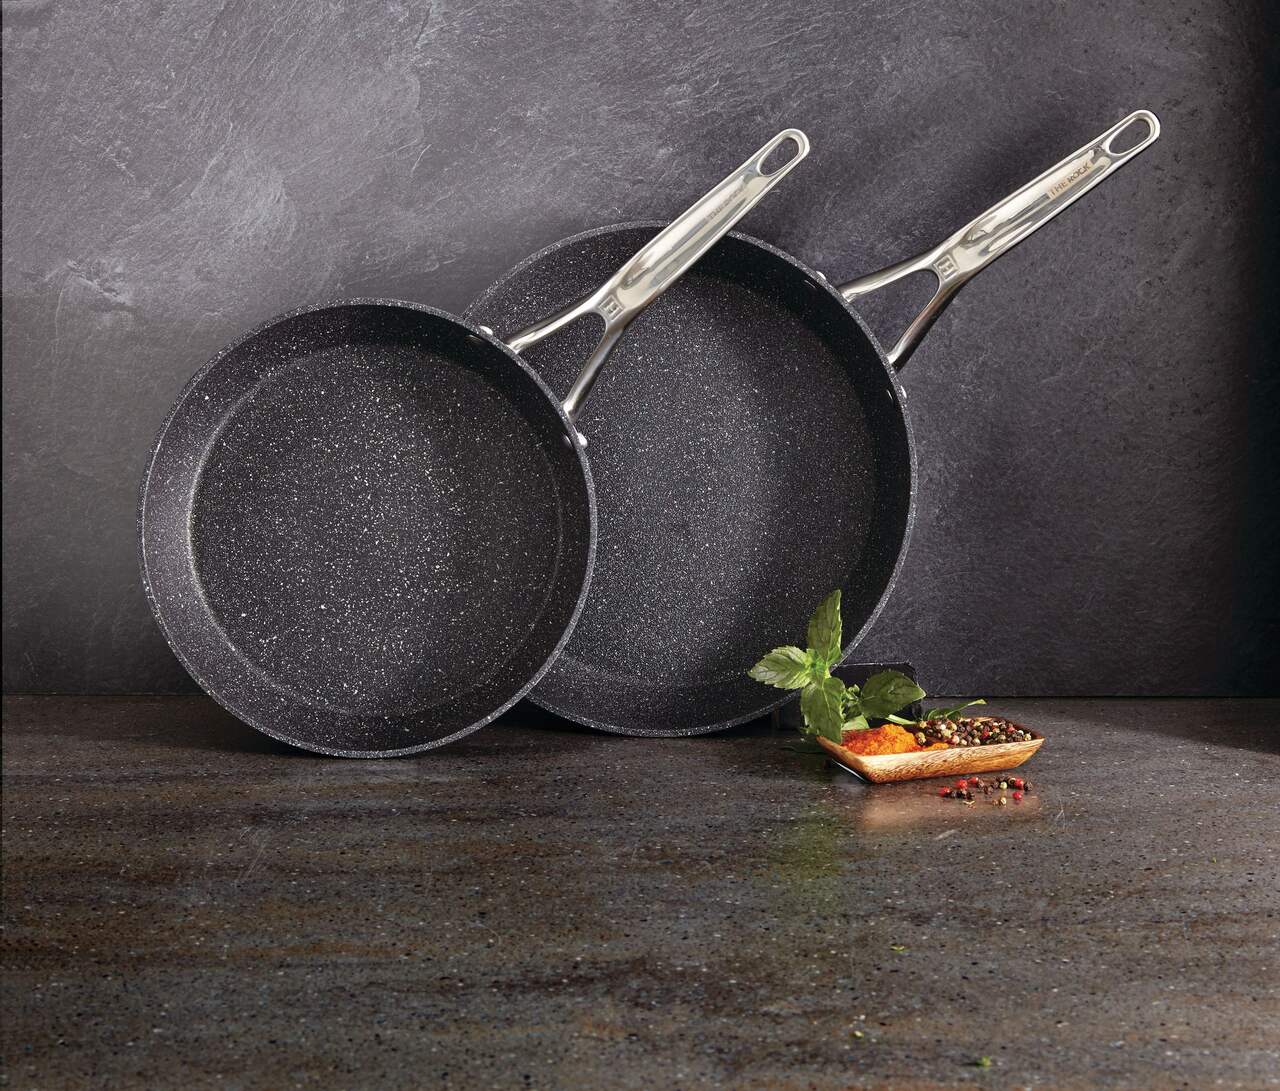 https://media-www.canadiantire.ca/product/living/kitchen/cookware/2992758/heritage-the-rock-2-pack-frypans-bc509081-89e9-4878-8100-26531683c67c-jpgrendition.jpg?imdensity=1&imwidth=1244&impolicy=mZoom